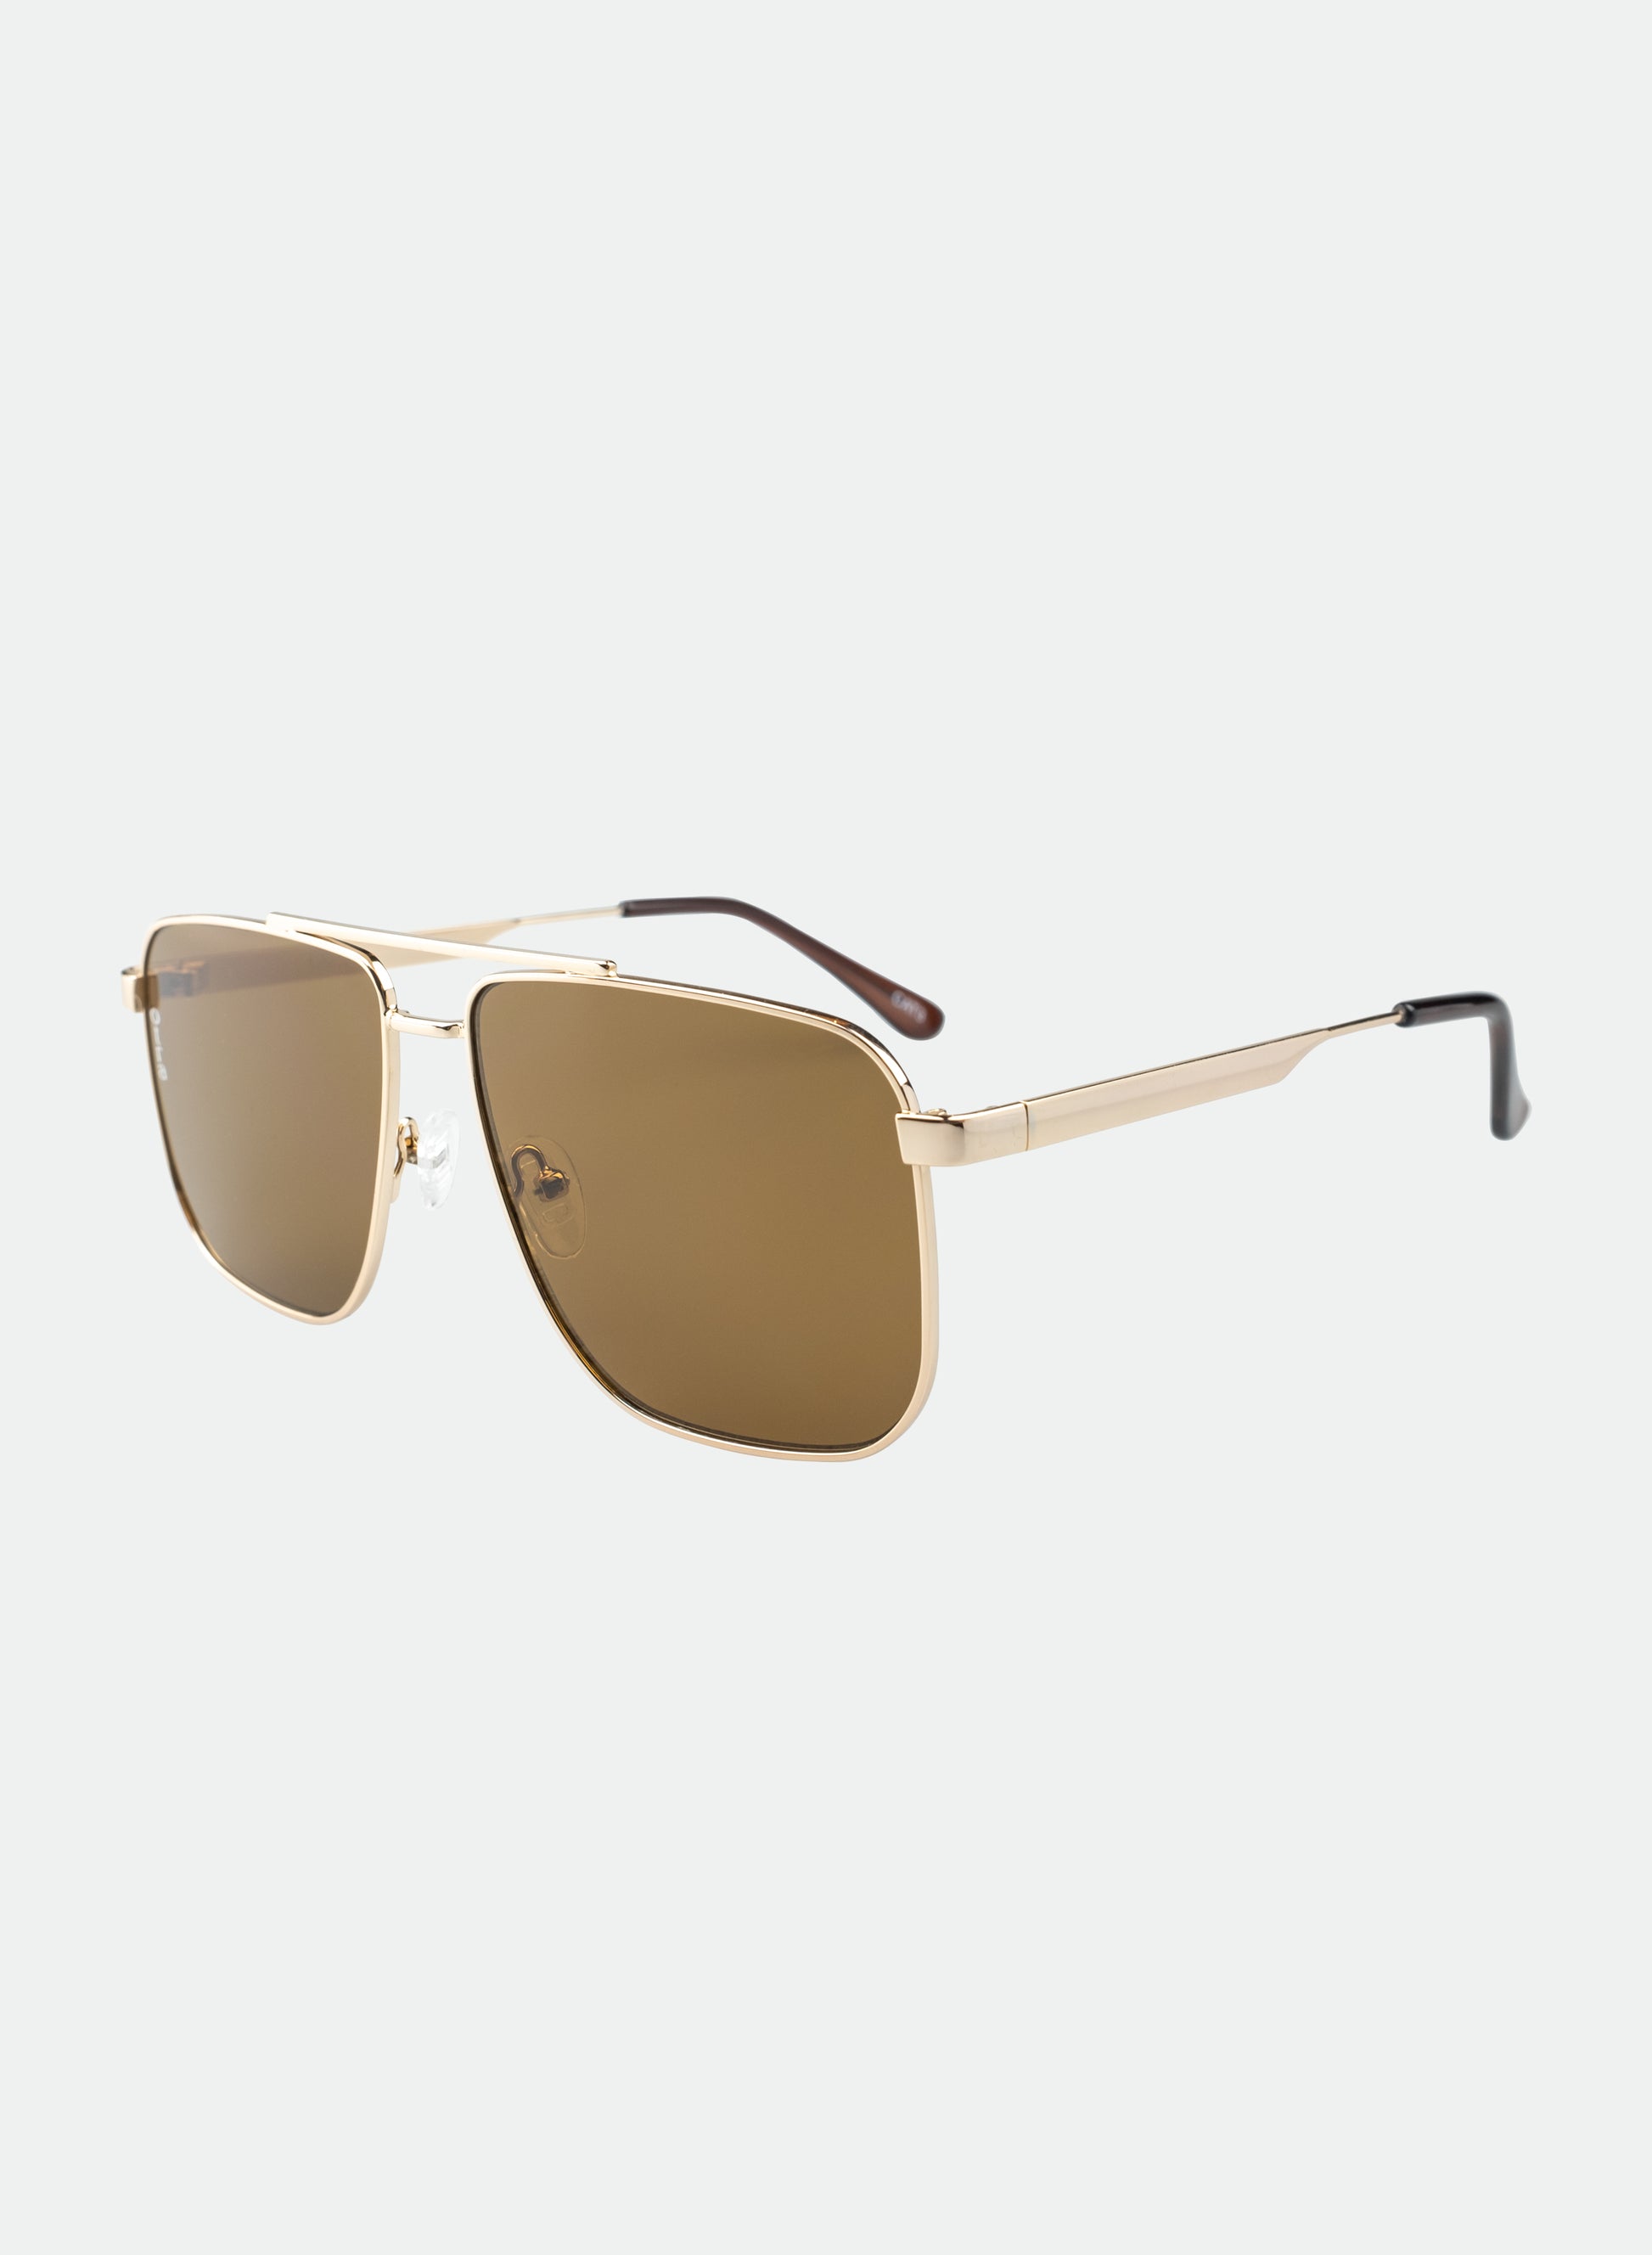 Sorrento gold sunglasses side view